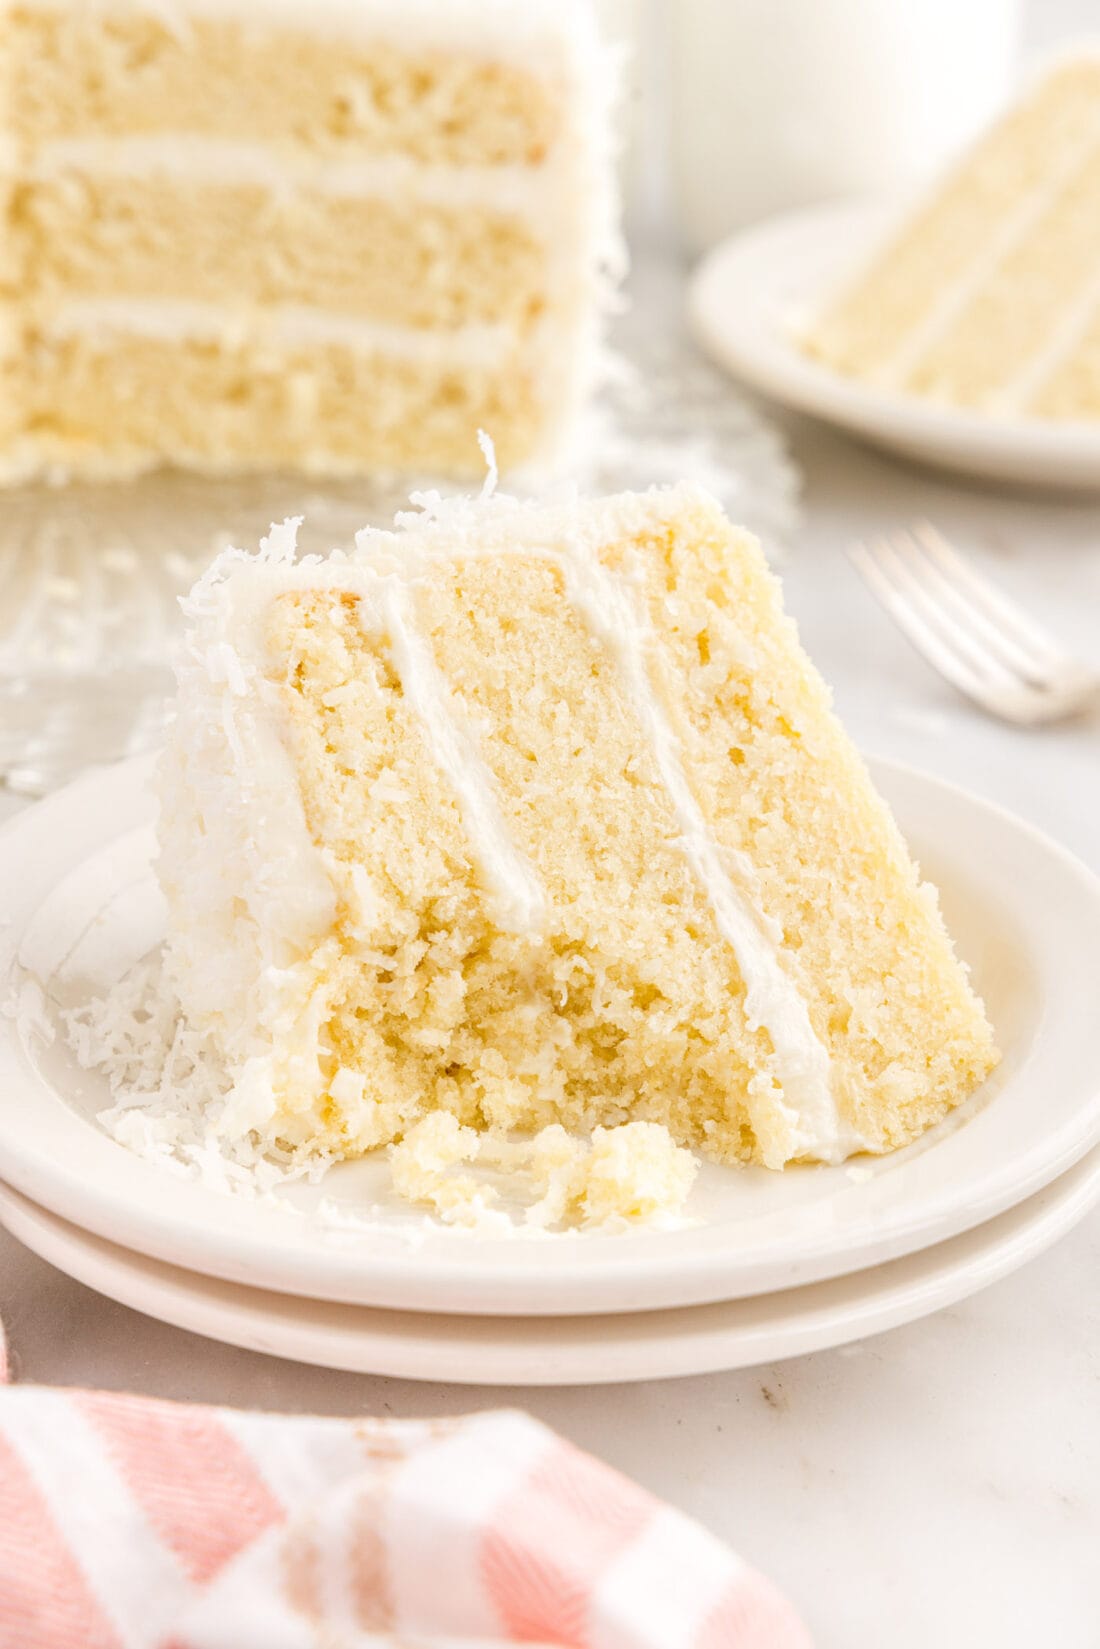 Slice of Coconut Cake on a plate with a bite removed